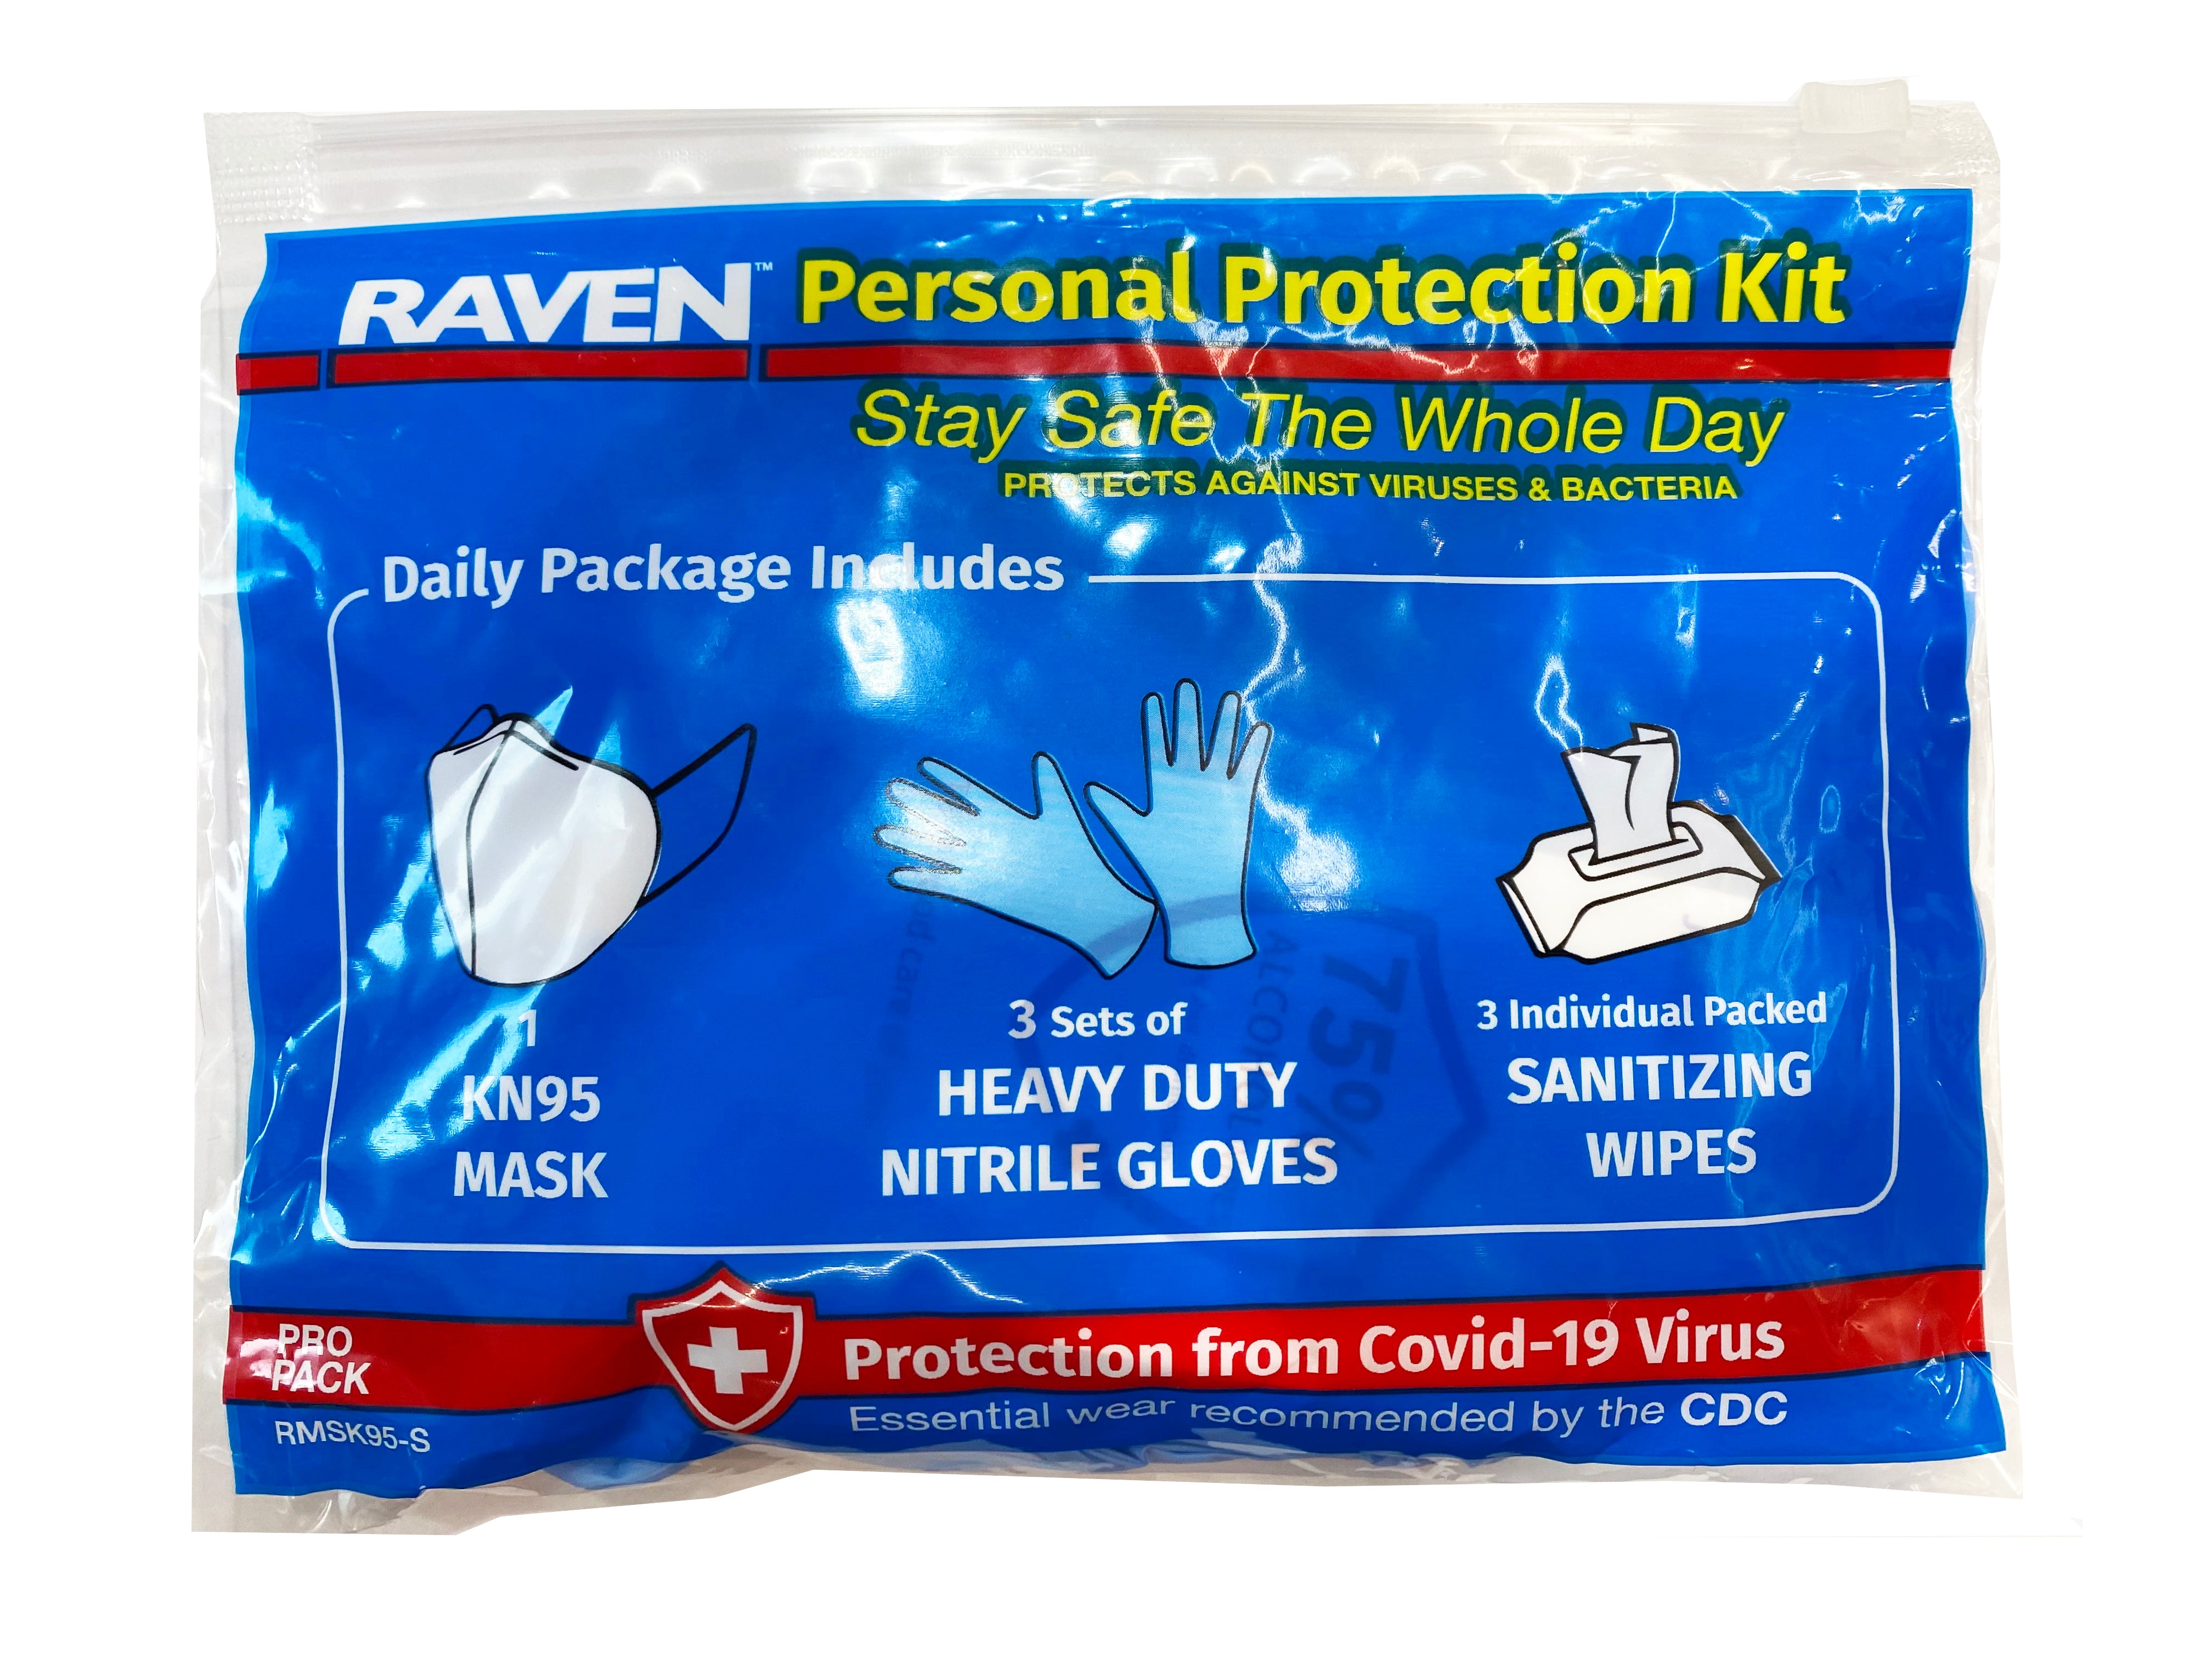 Personal Protection Kit – KN95 Mask, 3 Sets of PR HD Nitrile Gloves, 3 Sani Wipes